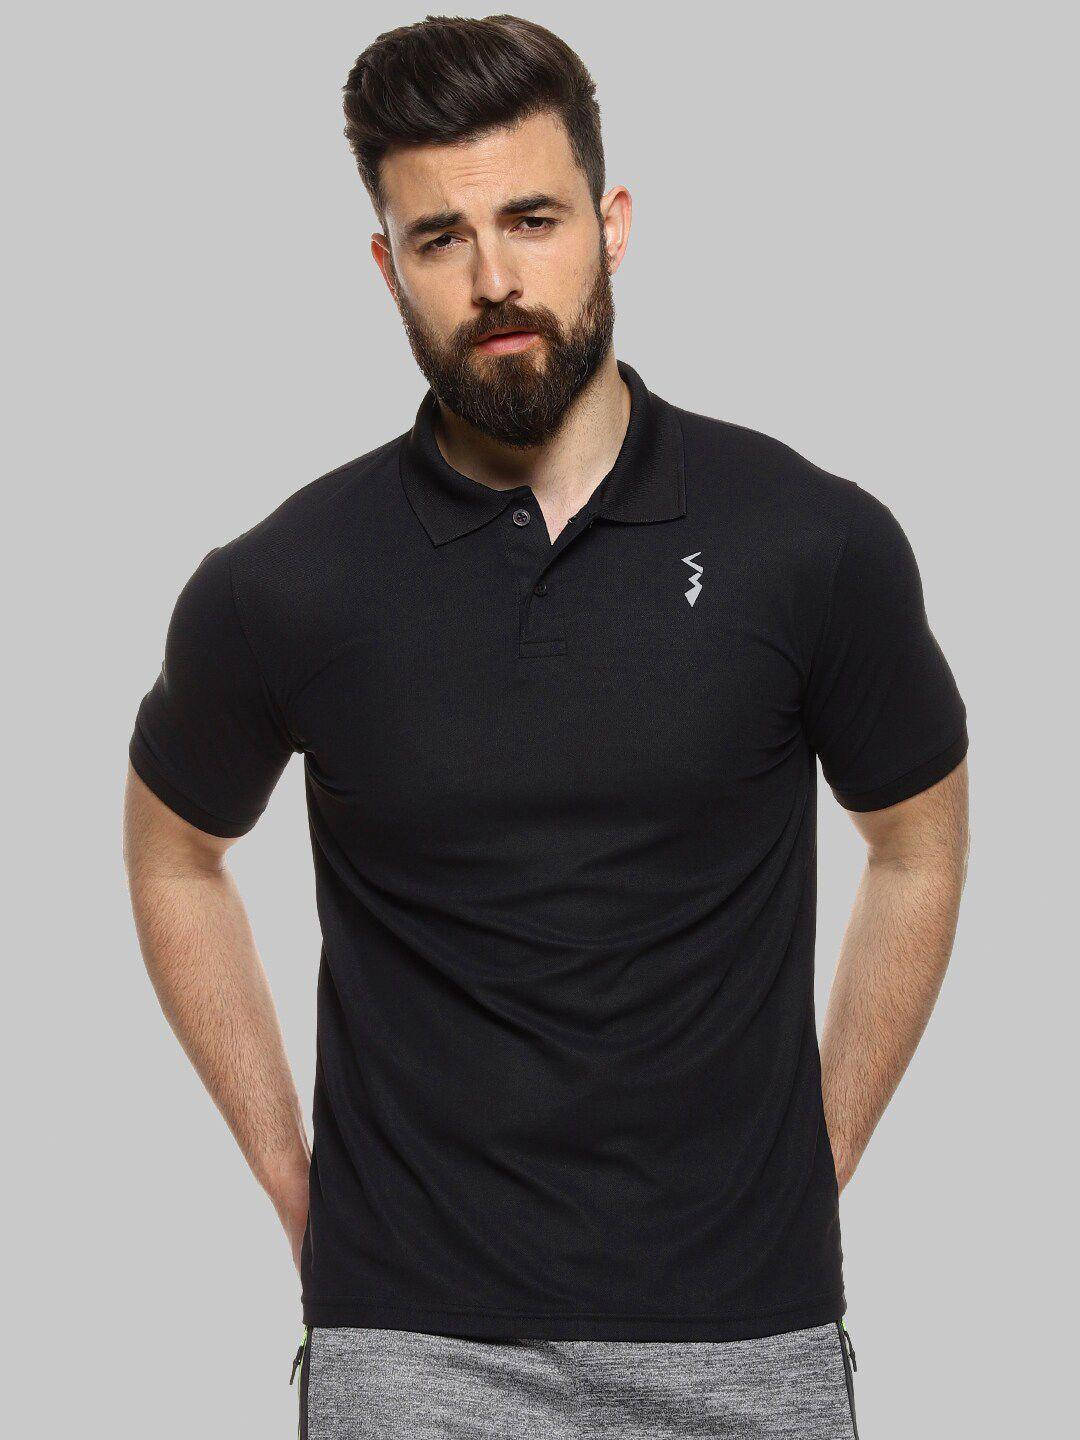 campus sutra polo collar short sleeves sports t-shirt